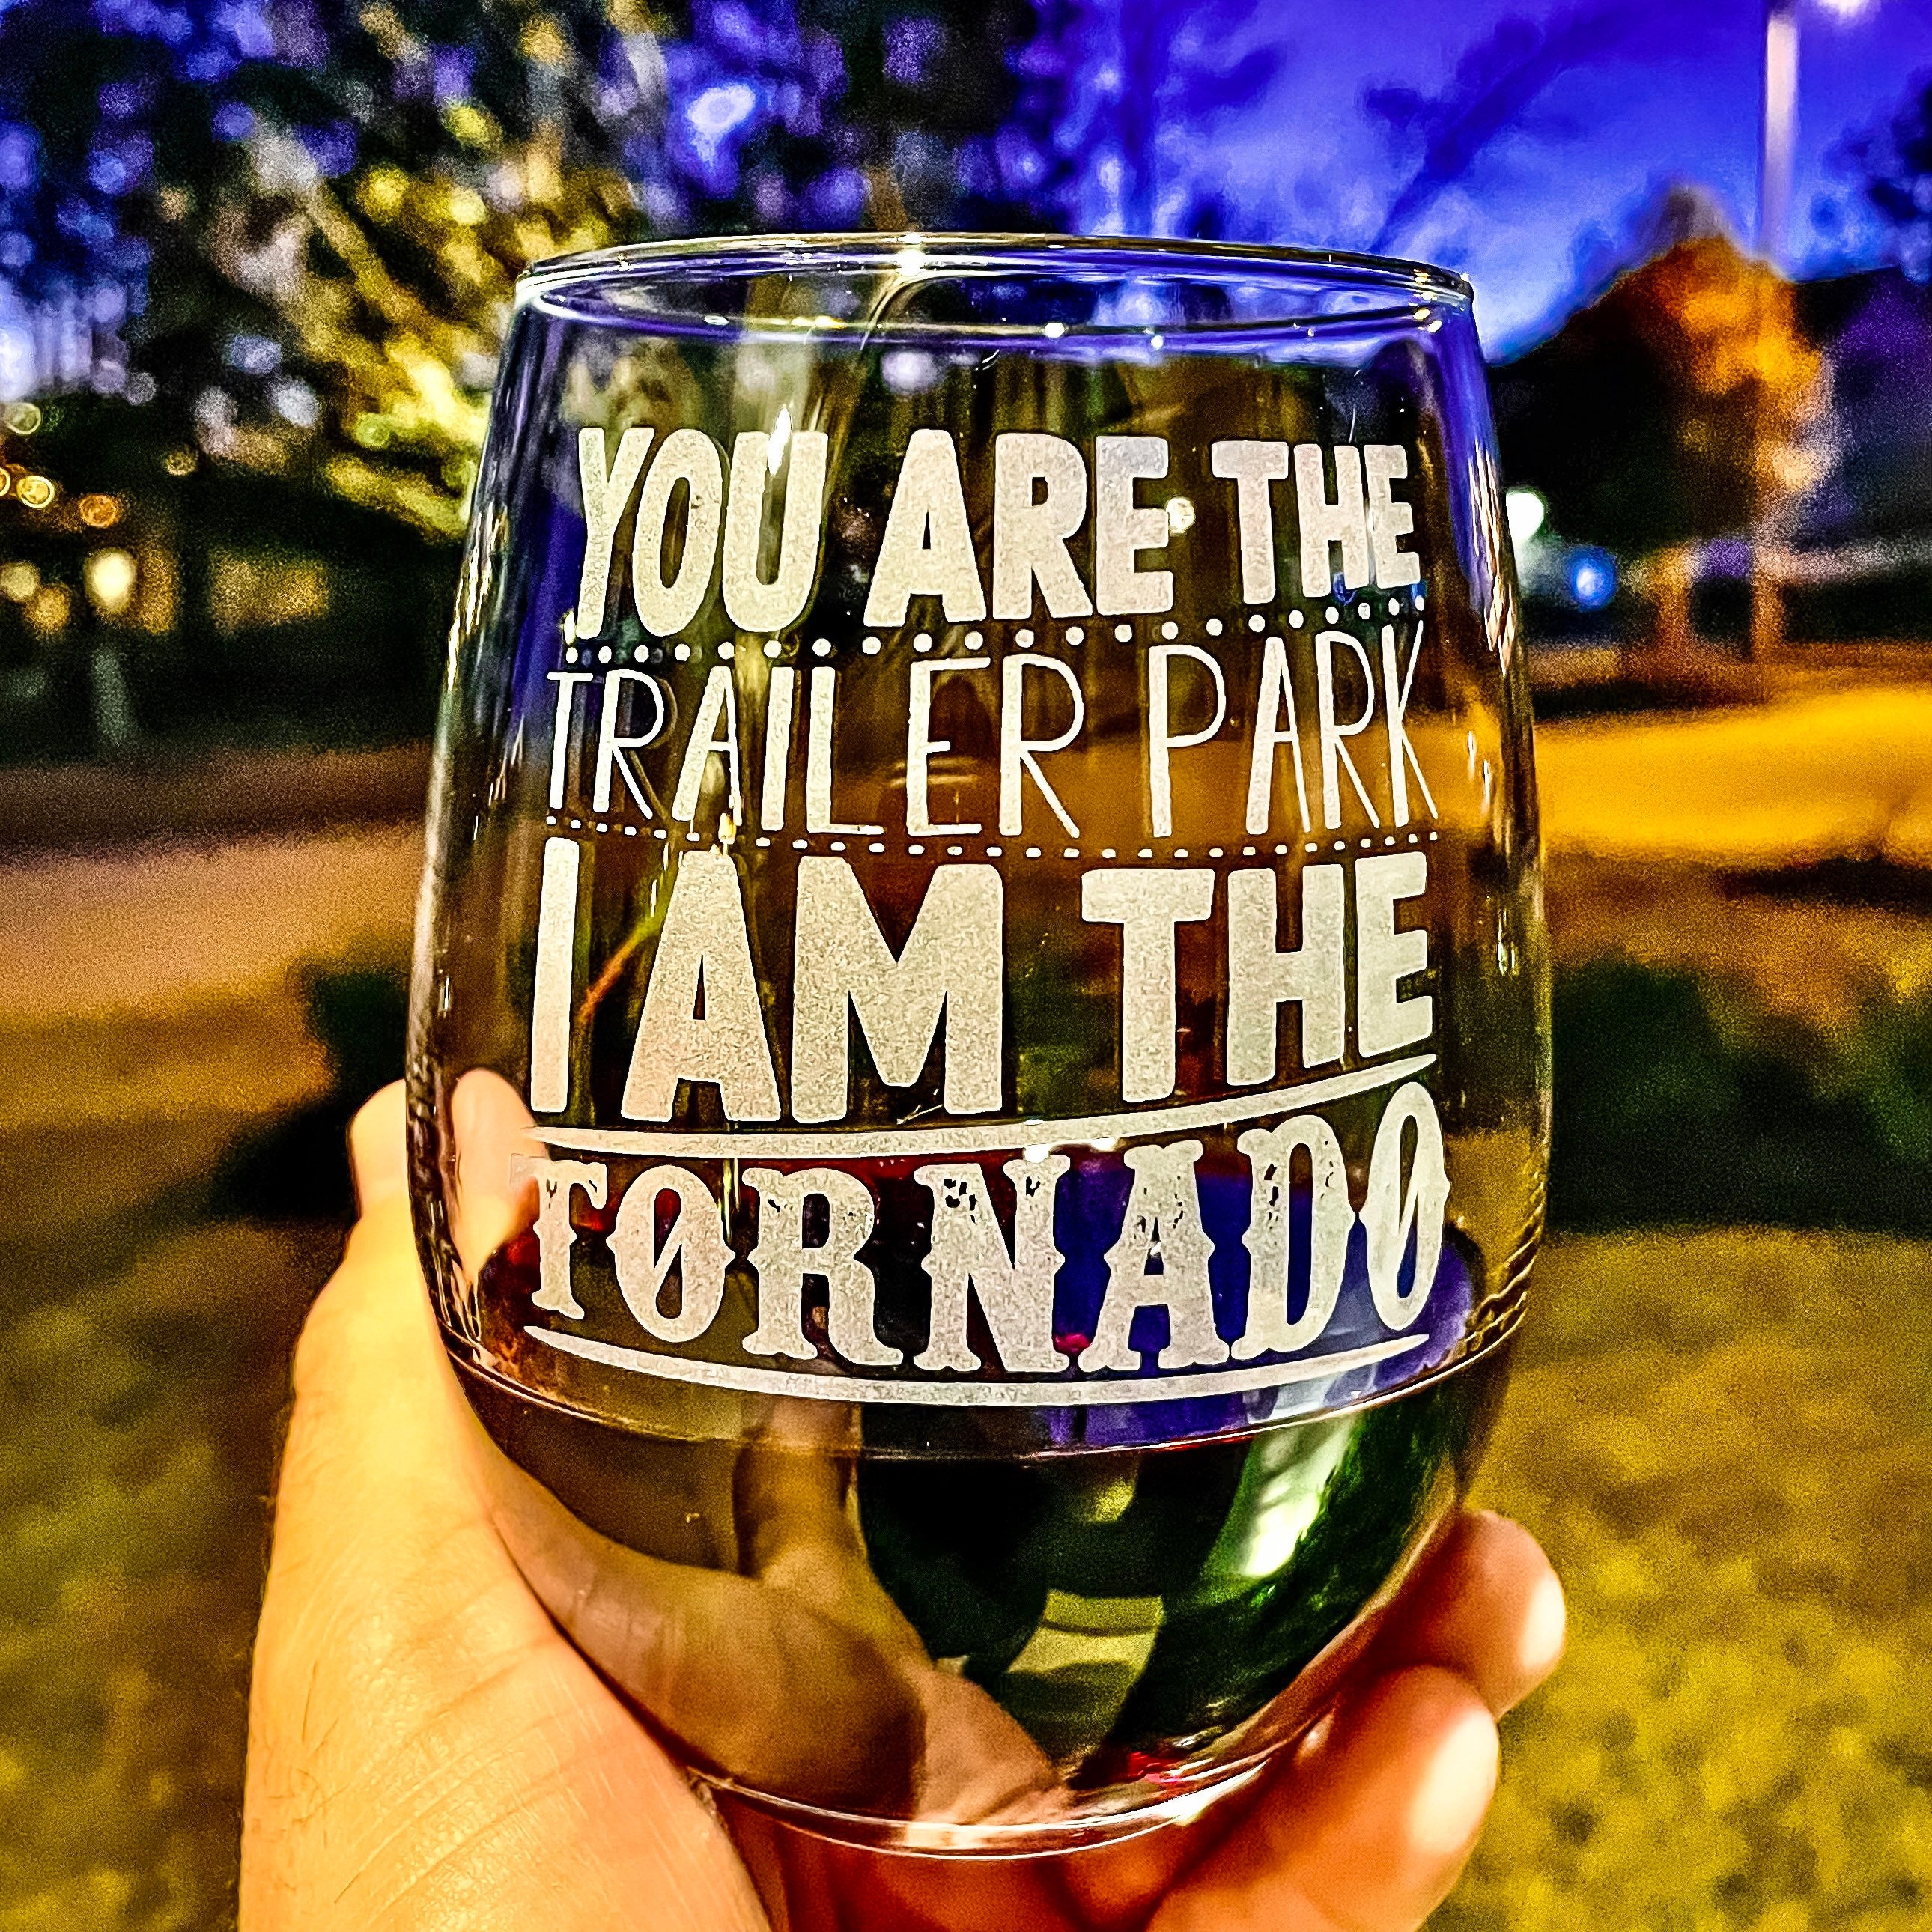 I Drink WINE Periodically Etched 9 oz Stemless Wine Glasses